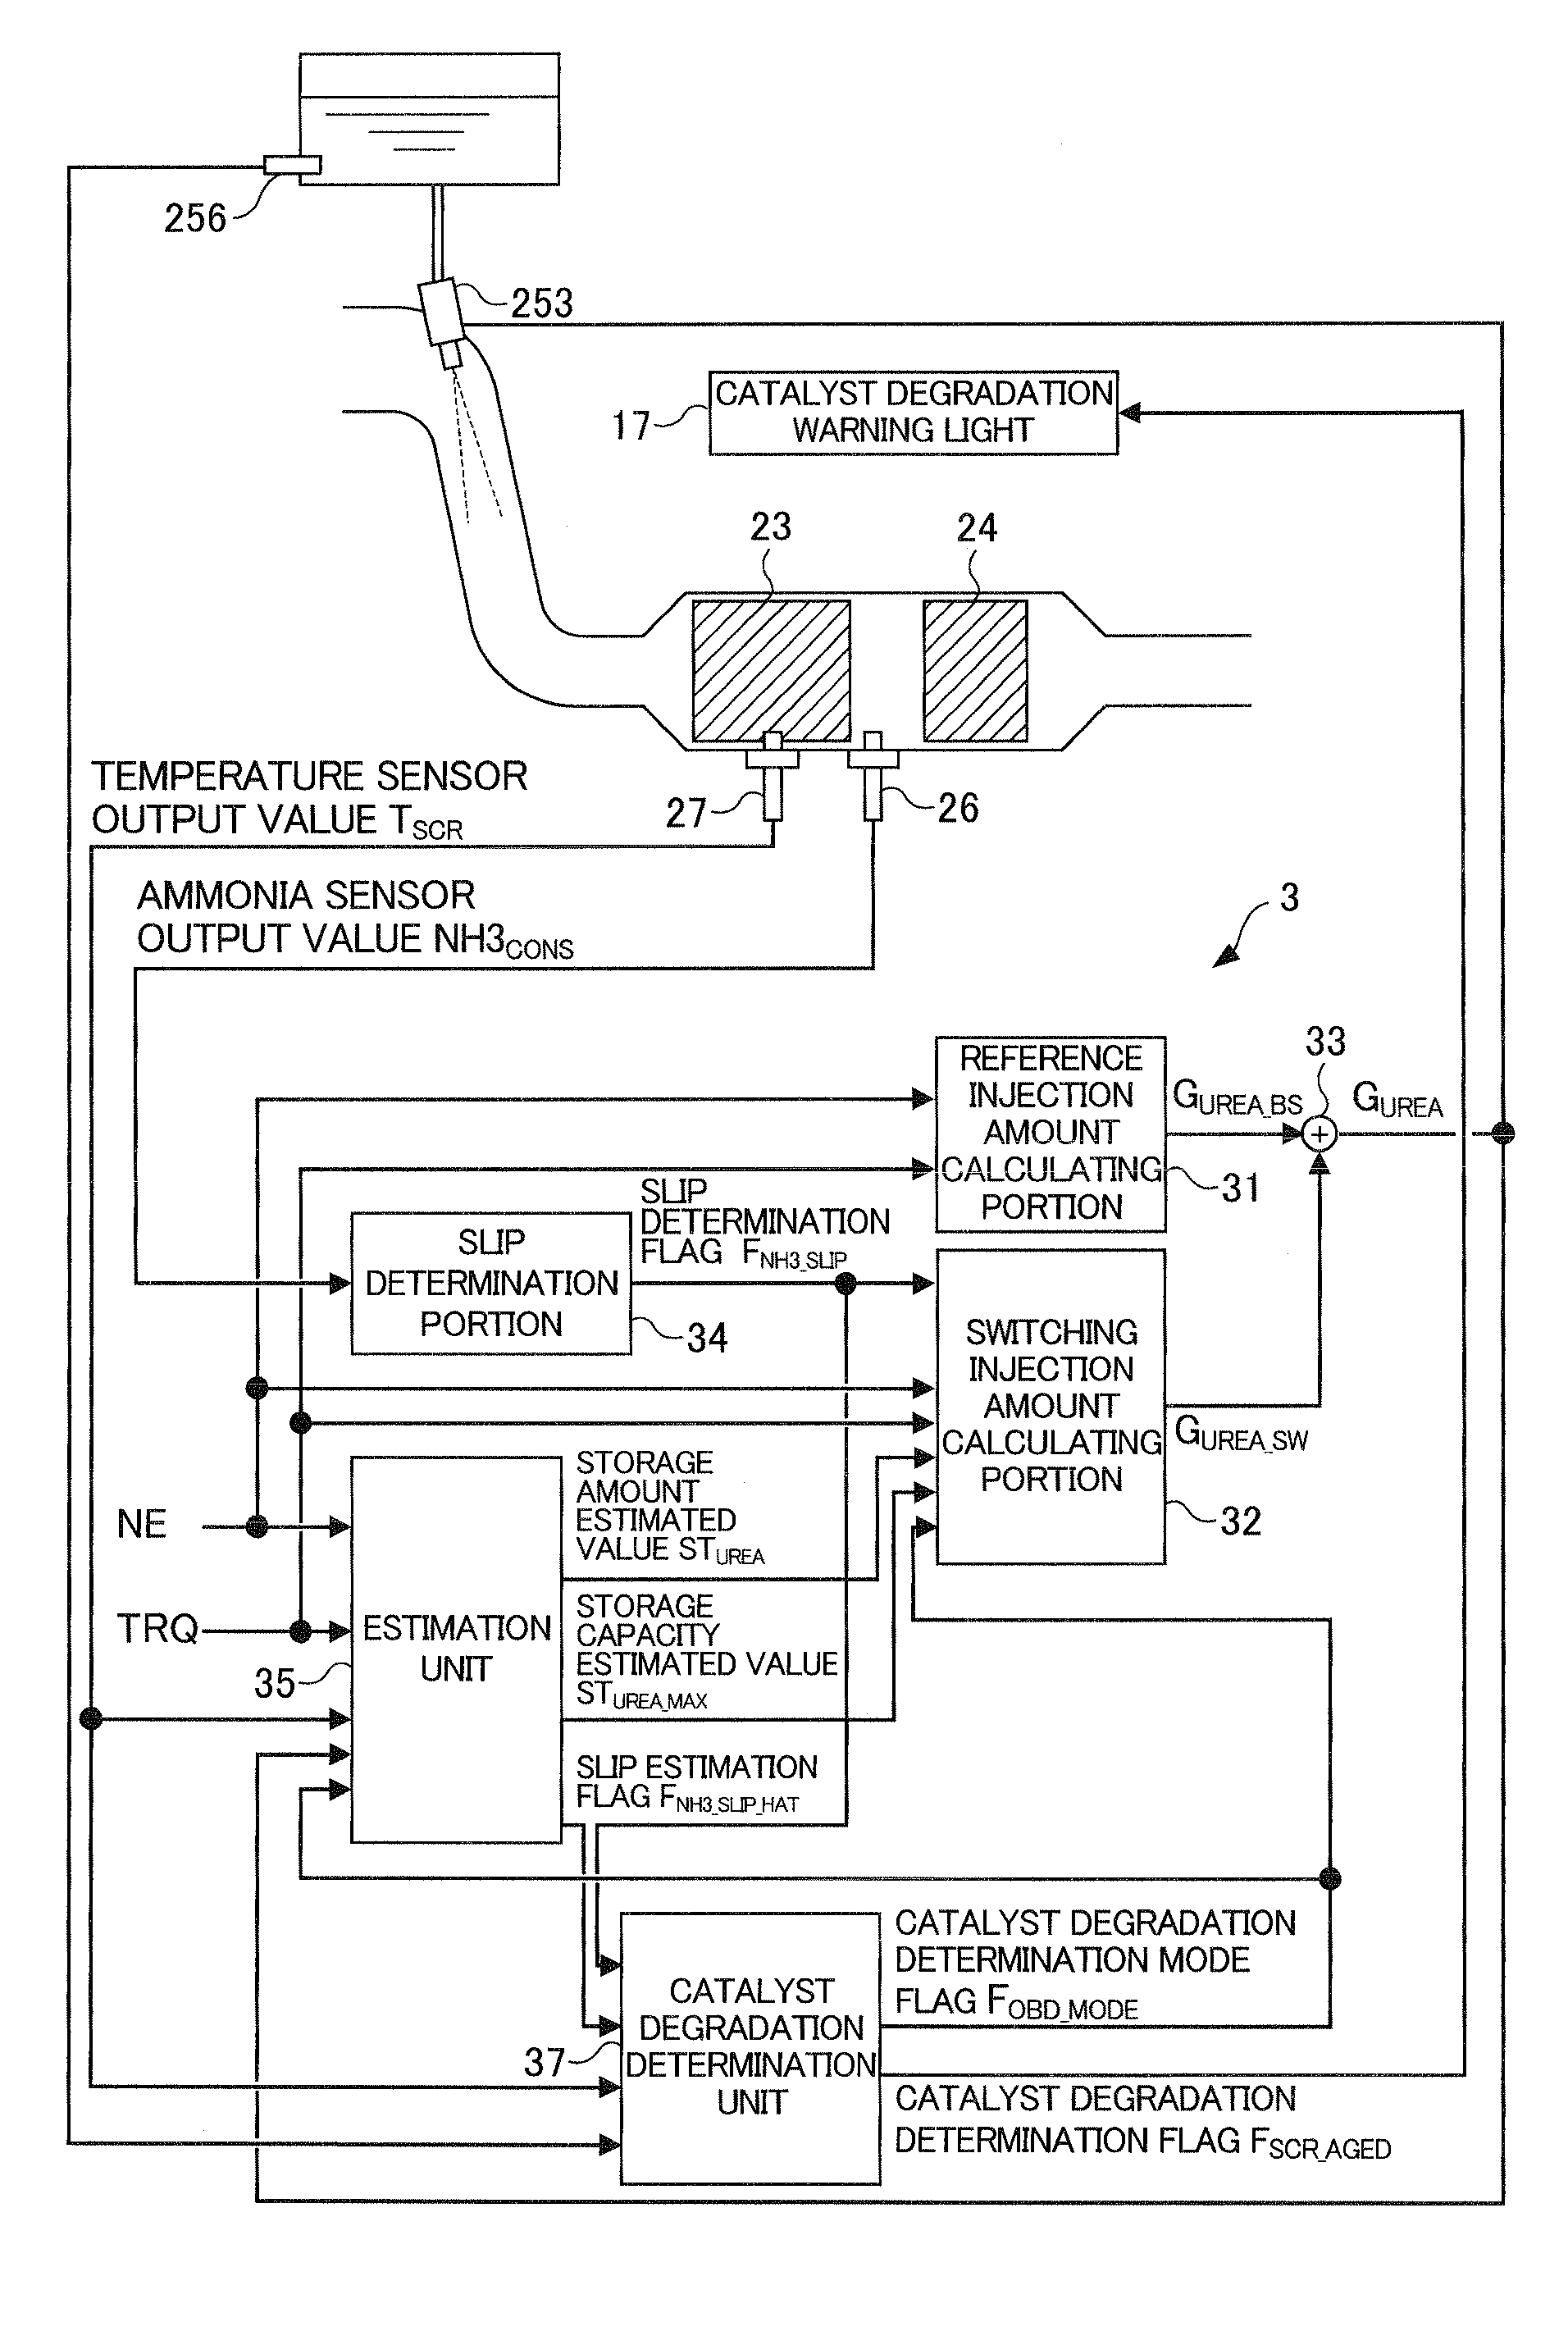 Catalyst degradation determination device for exhaust purification system